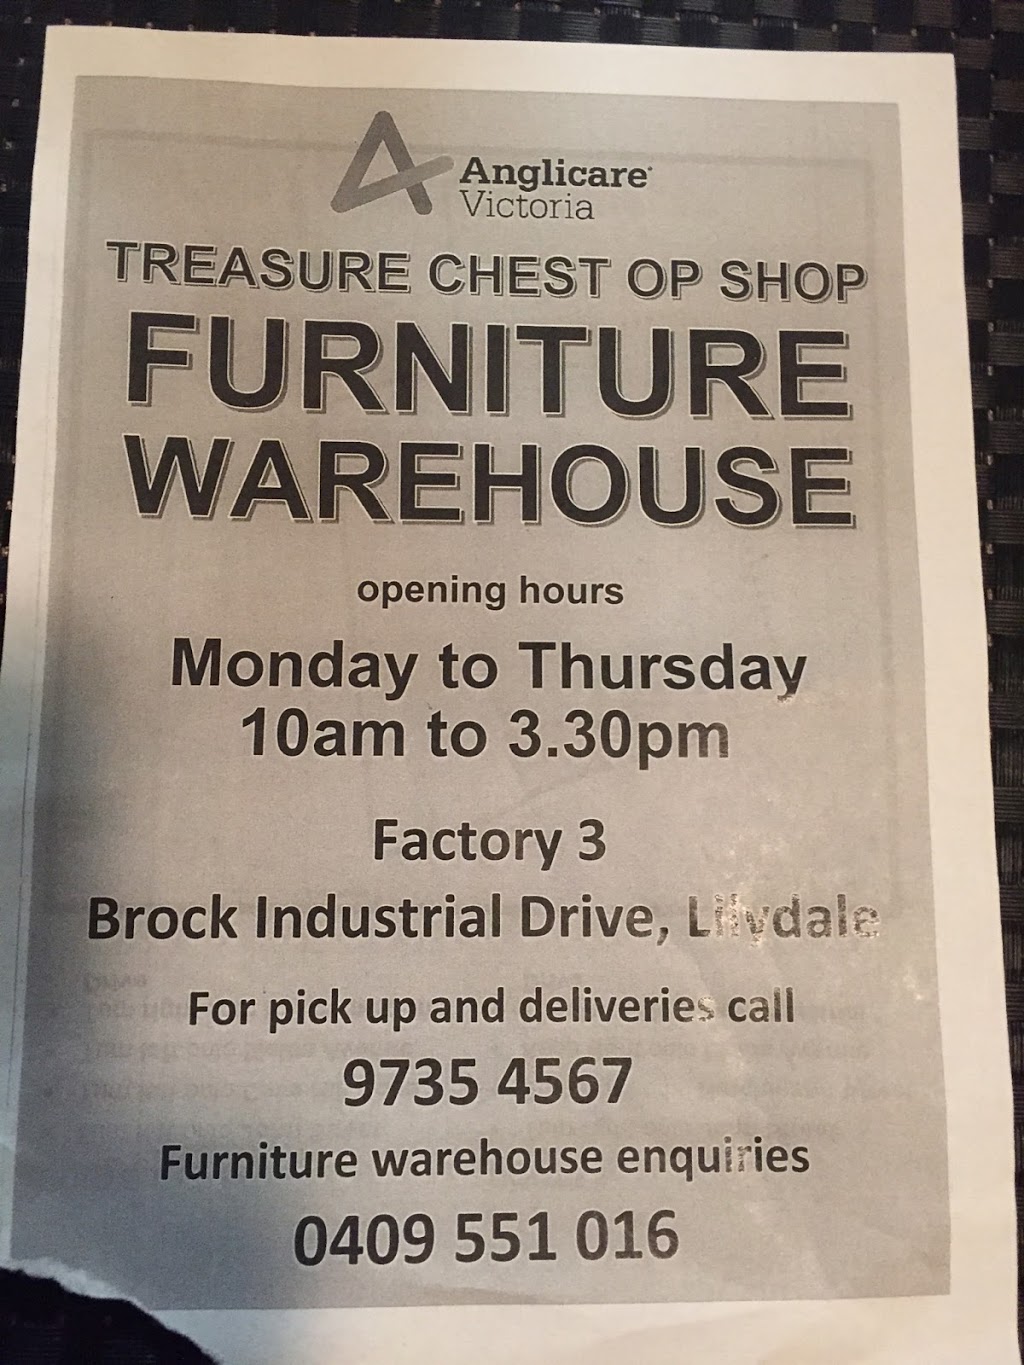 Anglicare Treasure Chest Op Shop Furniture Warehouse | furniture store | 3 Brock Industrial Dr, Lilydale VIC 3140, Australia